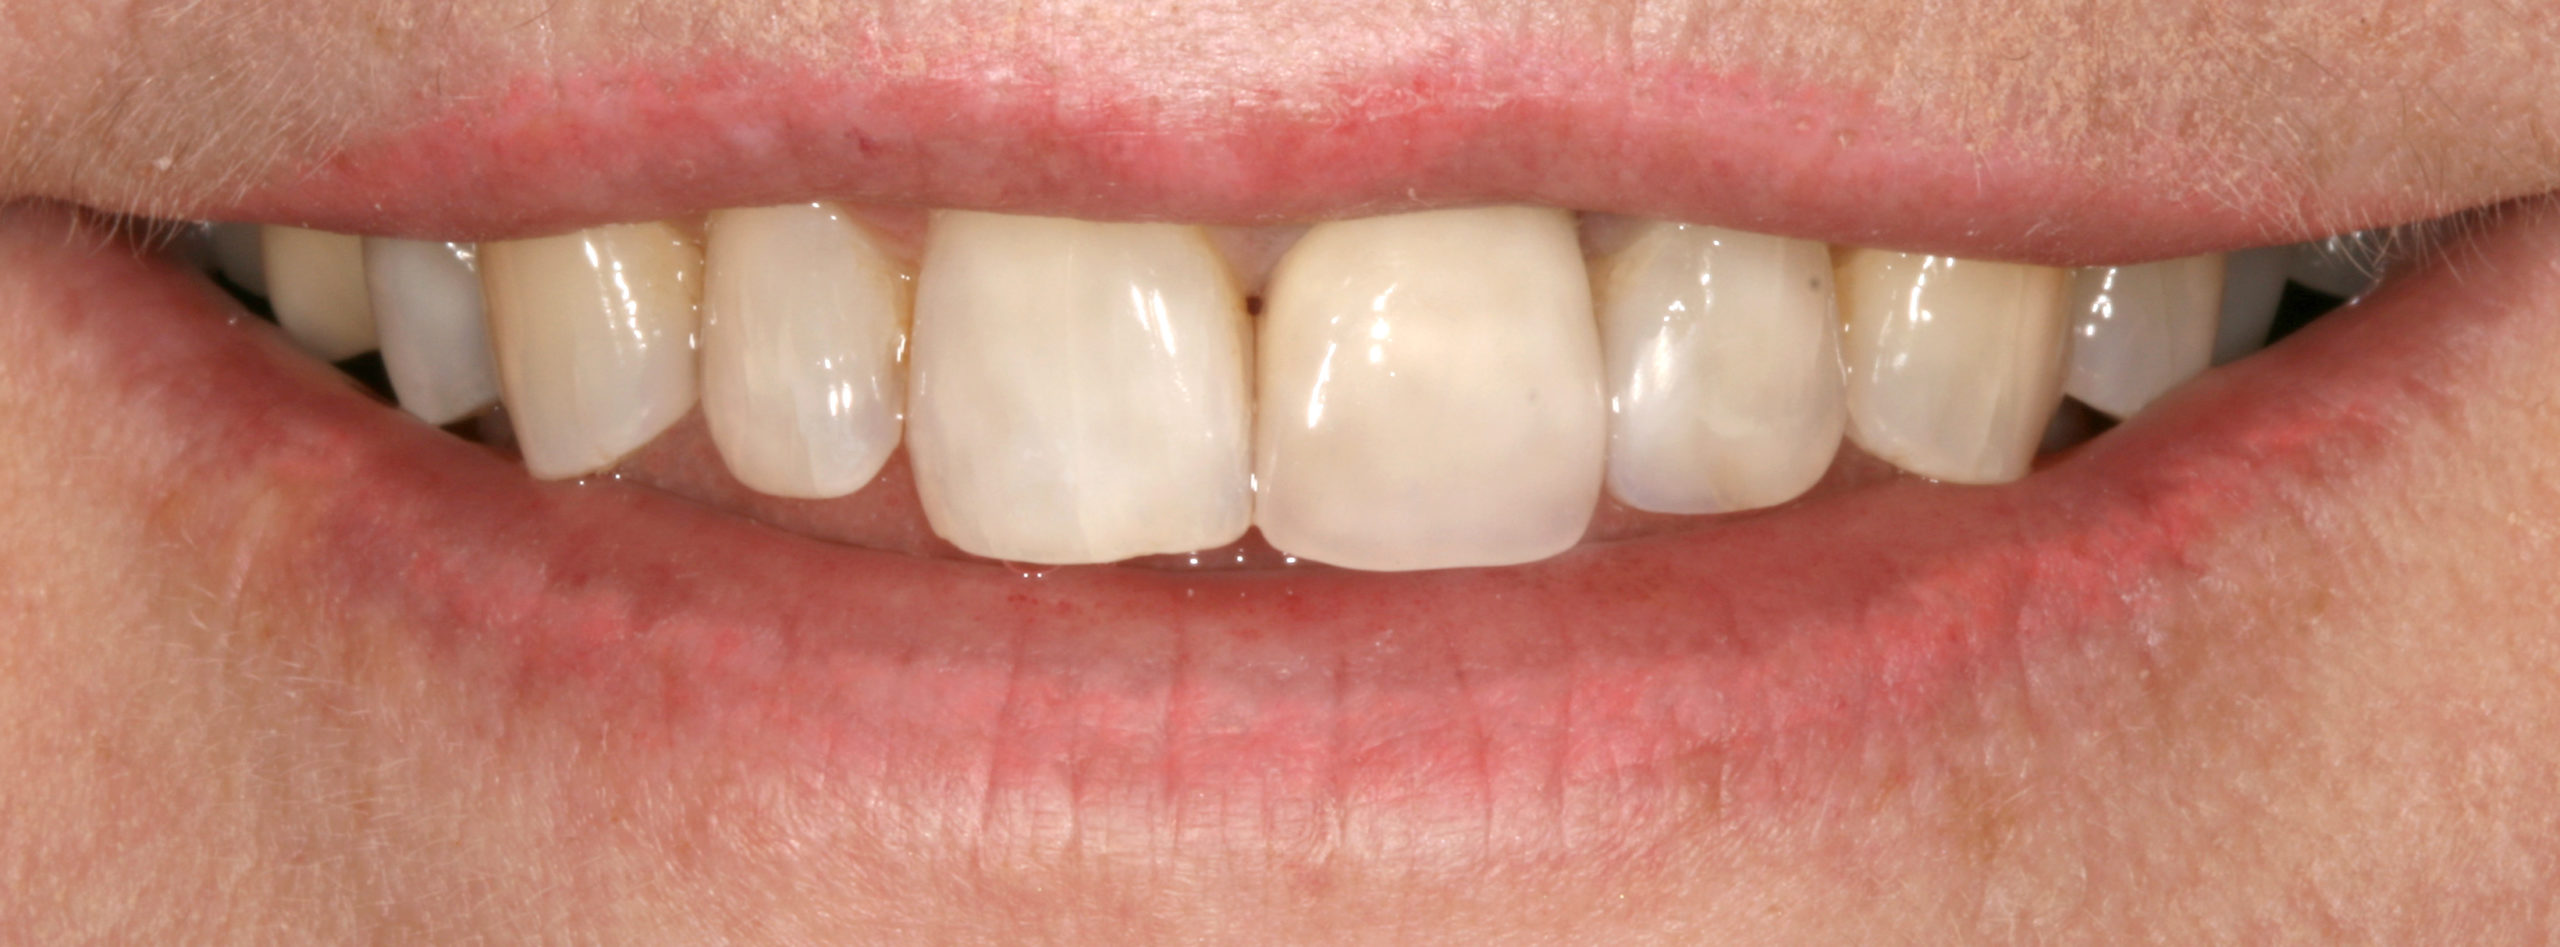 aesthetic case 4 (porcelain/metal crown replacement) - after